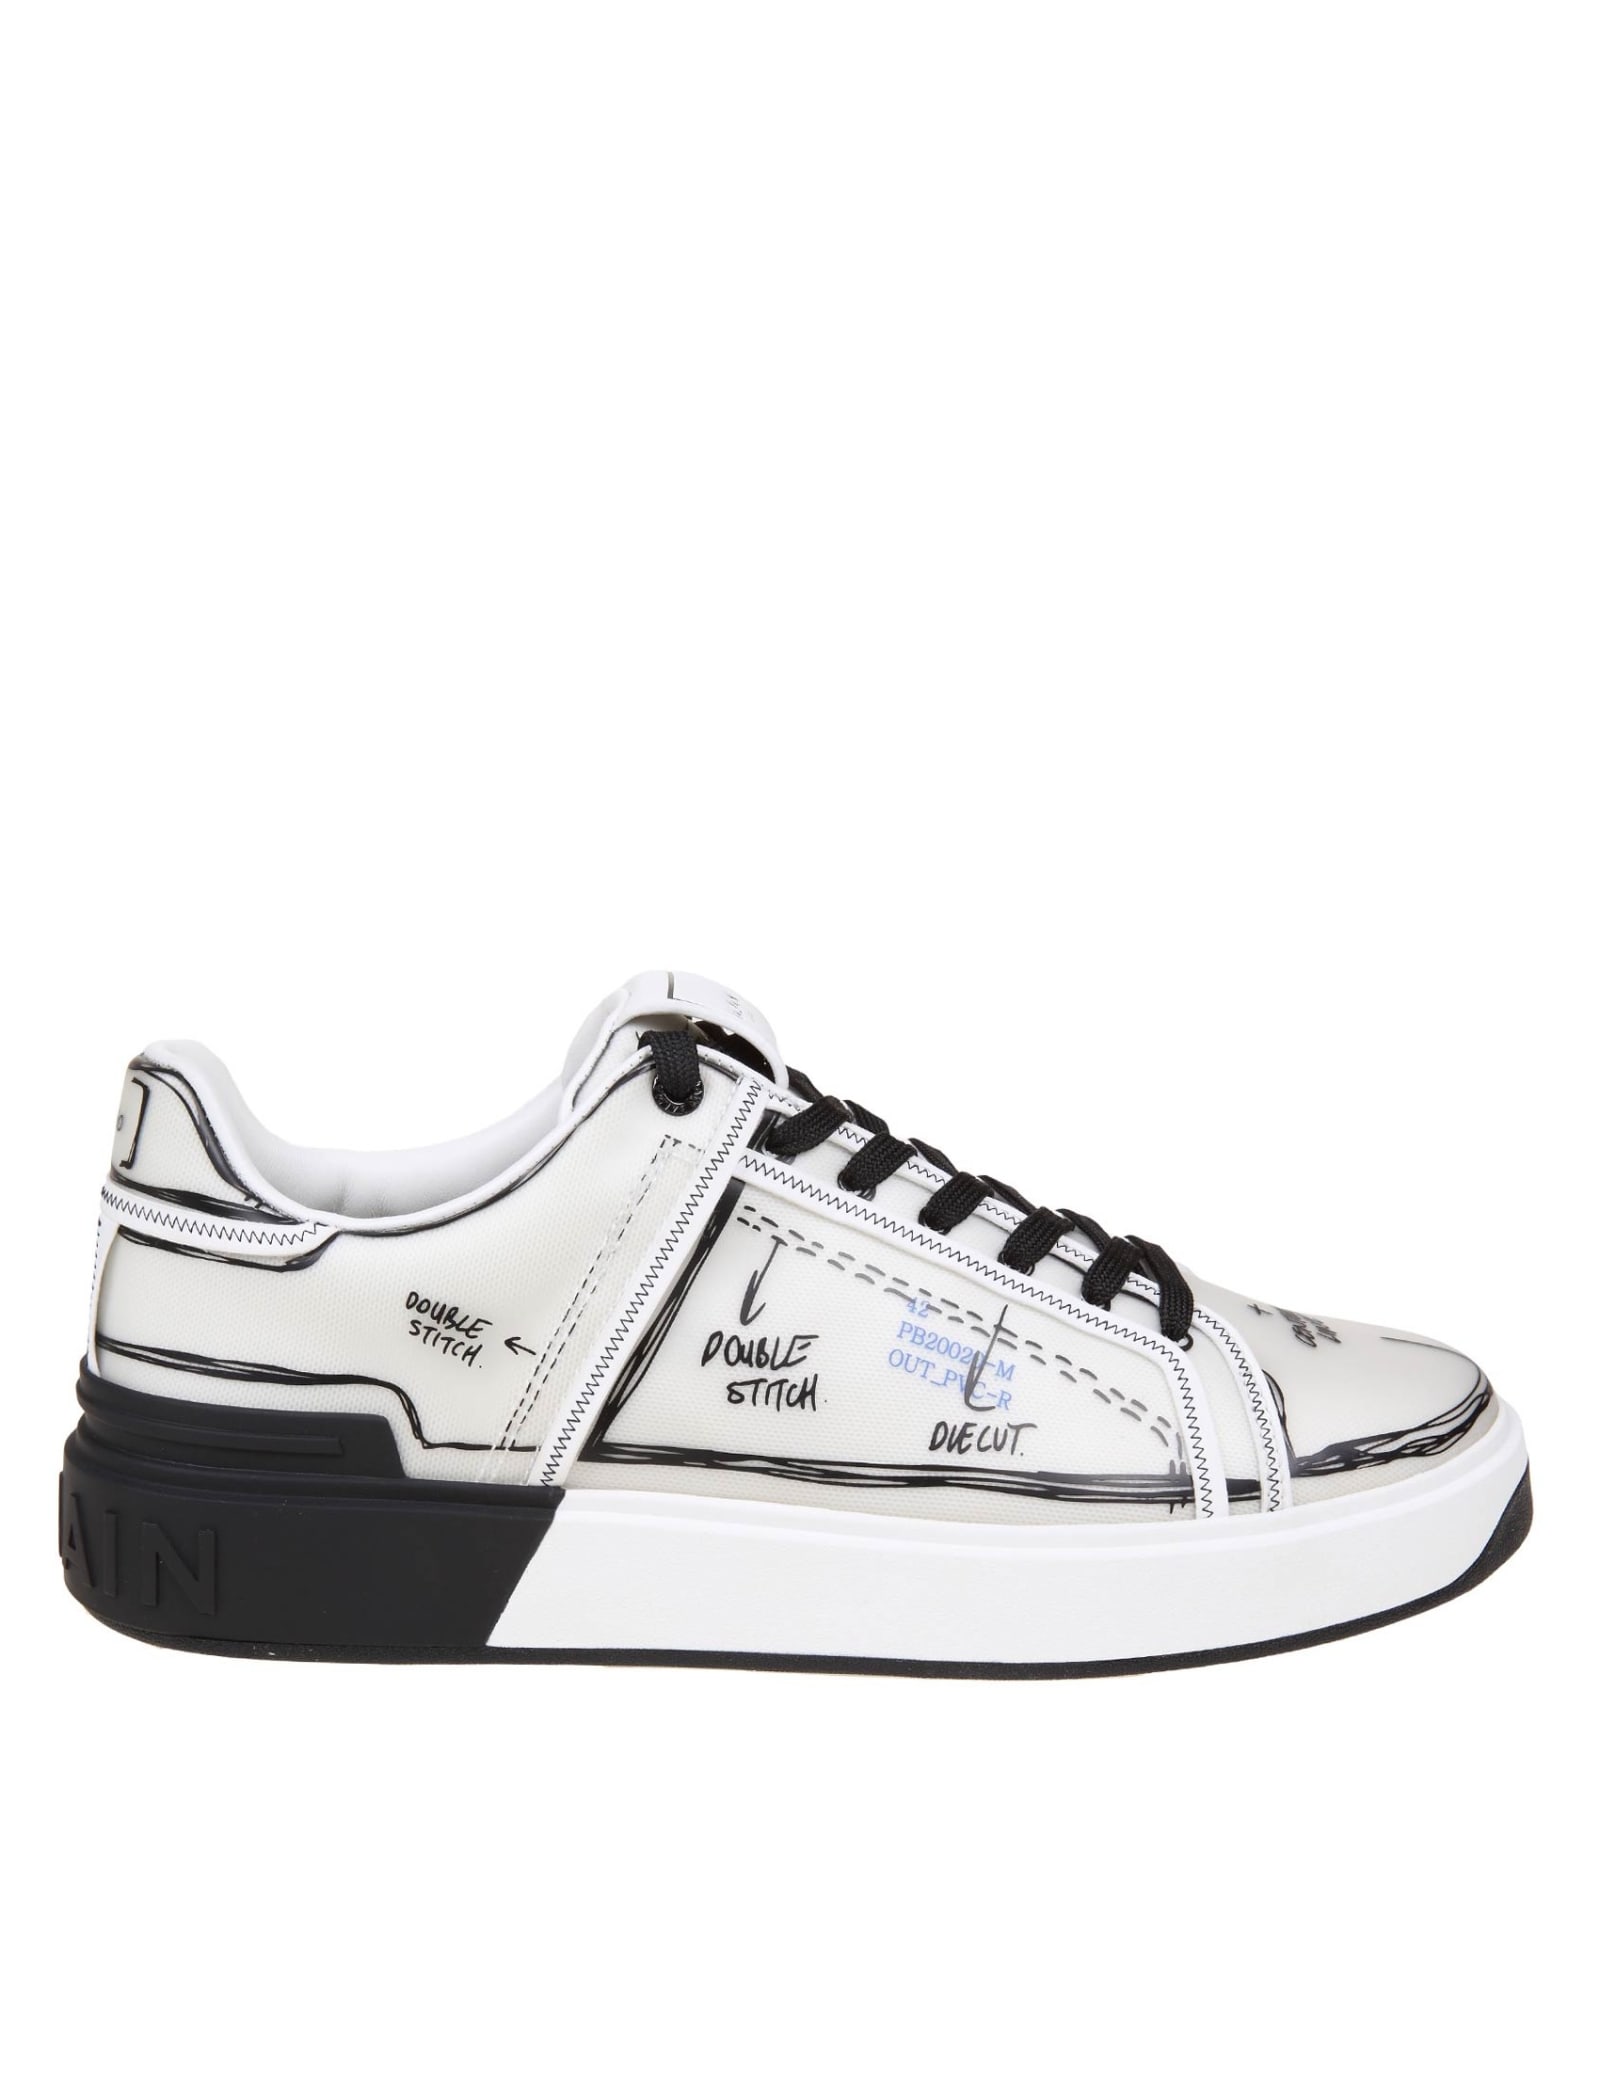 BALMAIN B-COURT SNEAKERS IN LEATHER WITH MONOGRAM,11796533